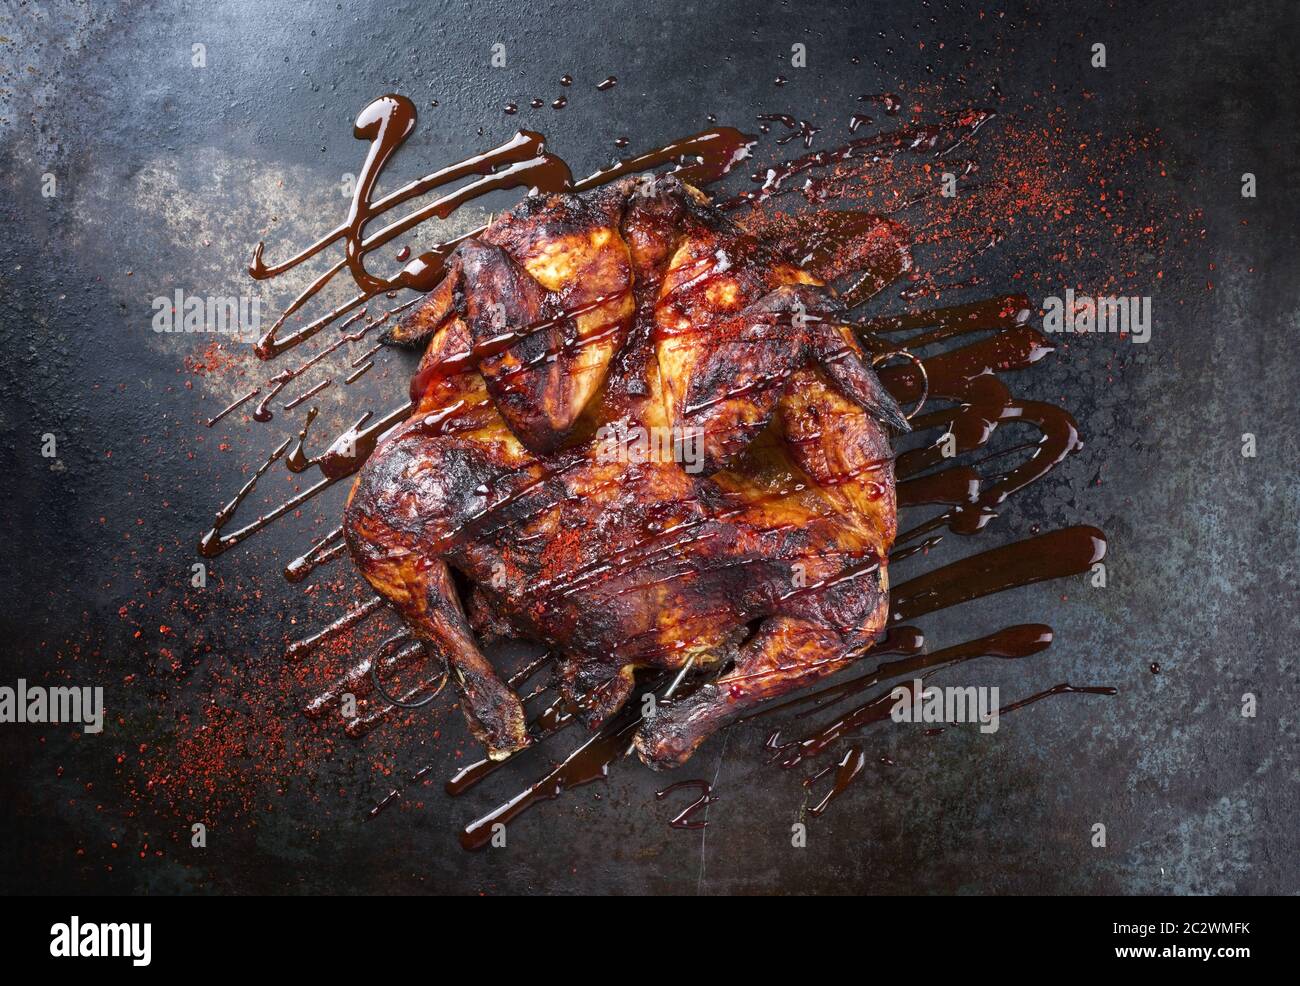 Barbecue spatchcocked barbecue chicken al mattone with hot chili sauce as top view on an old metal sheet Stock Photo